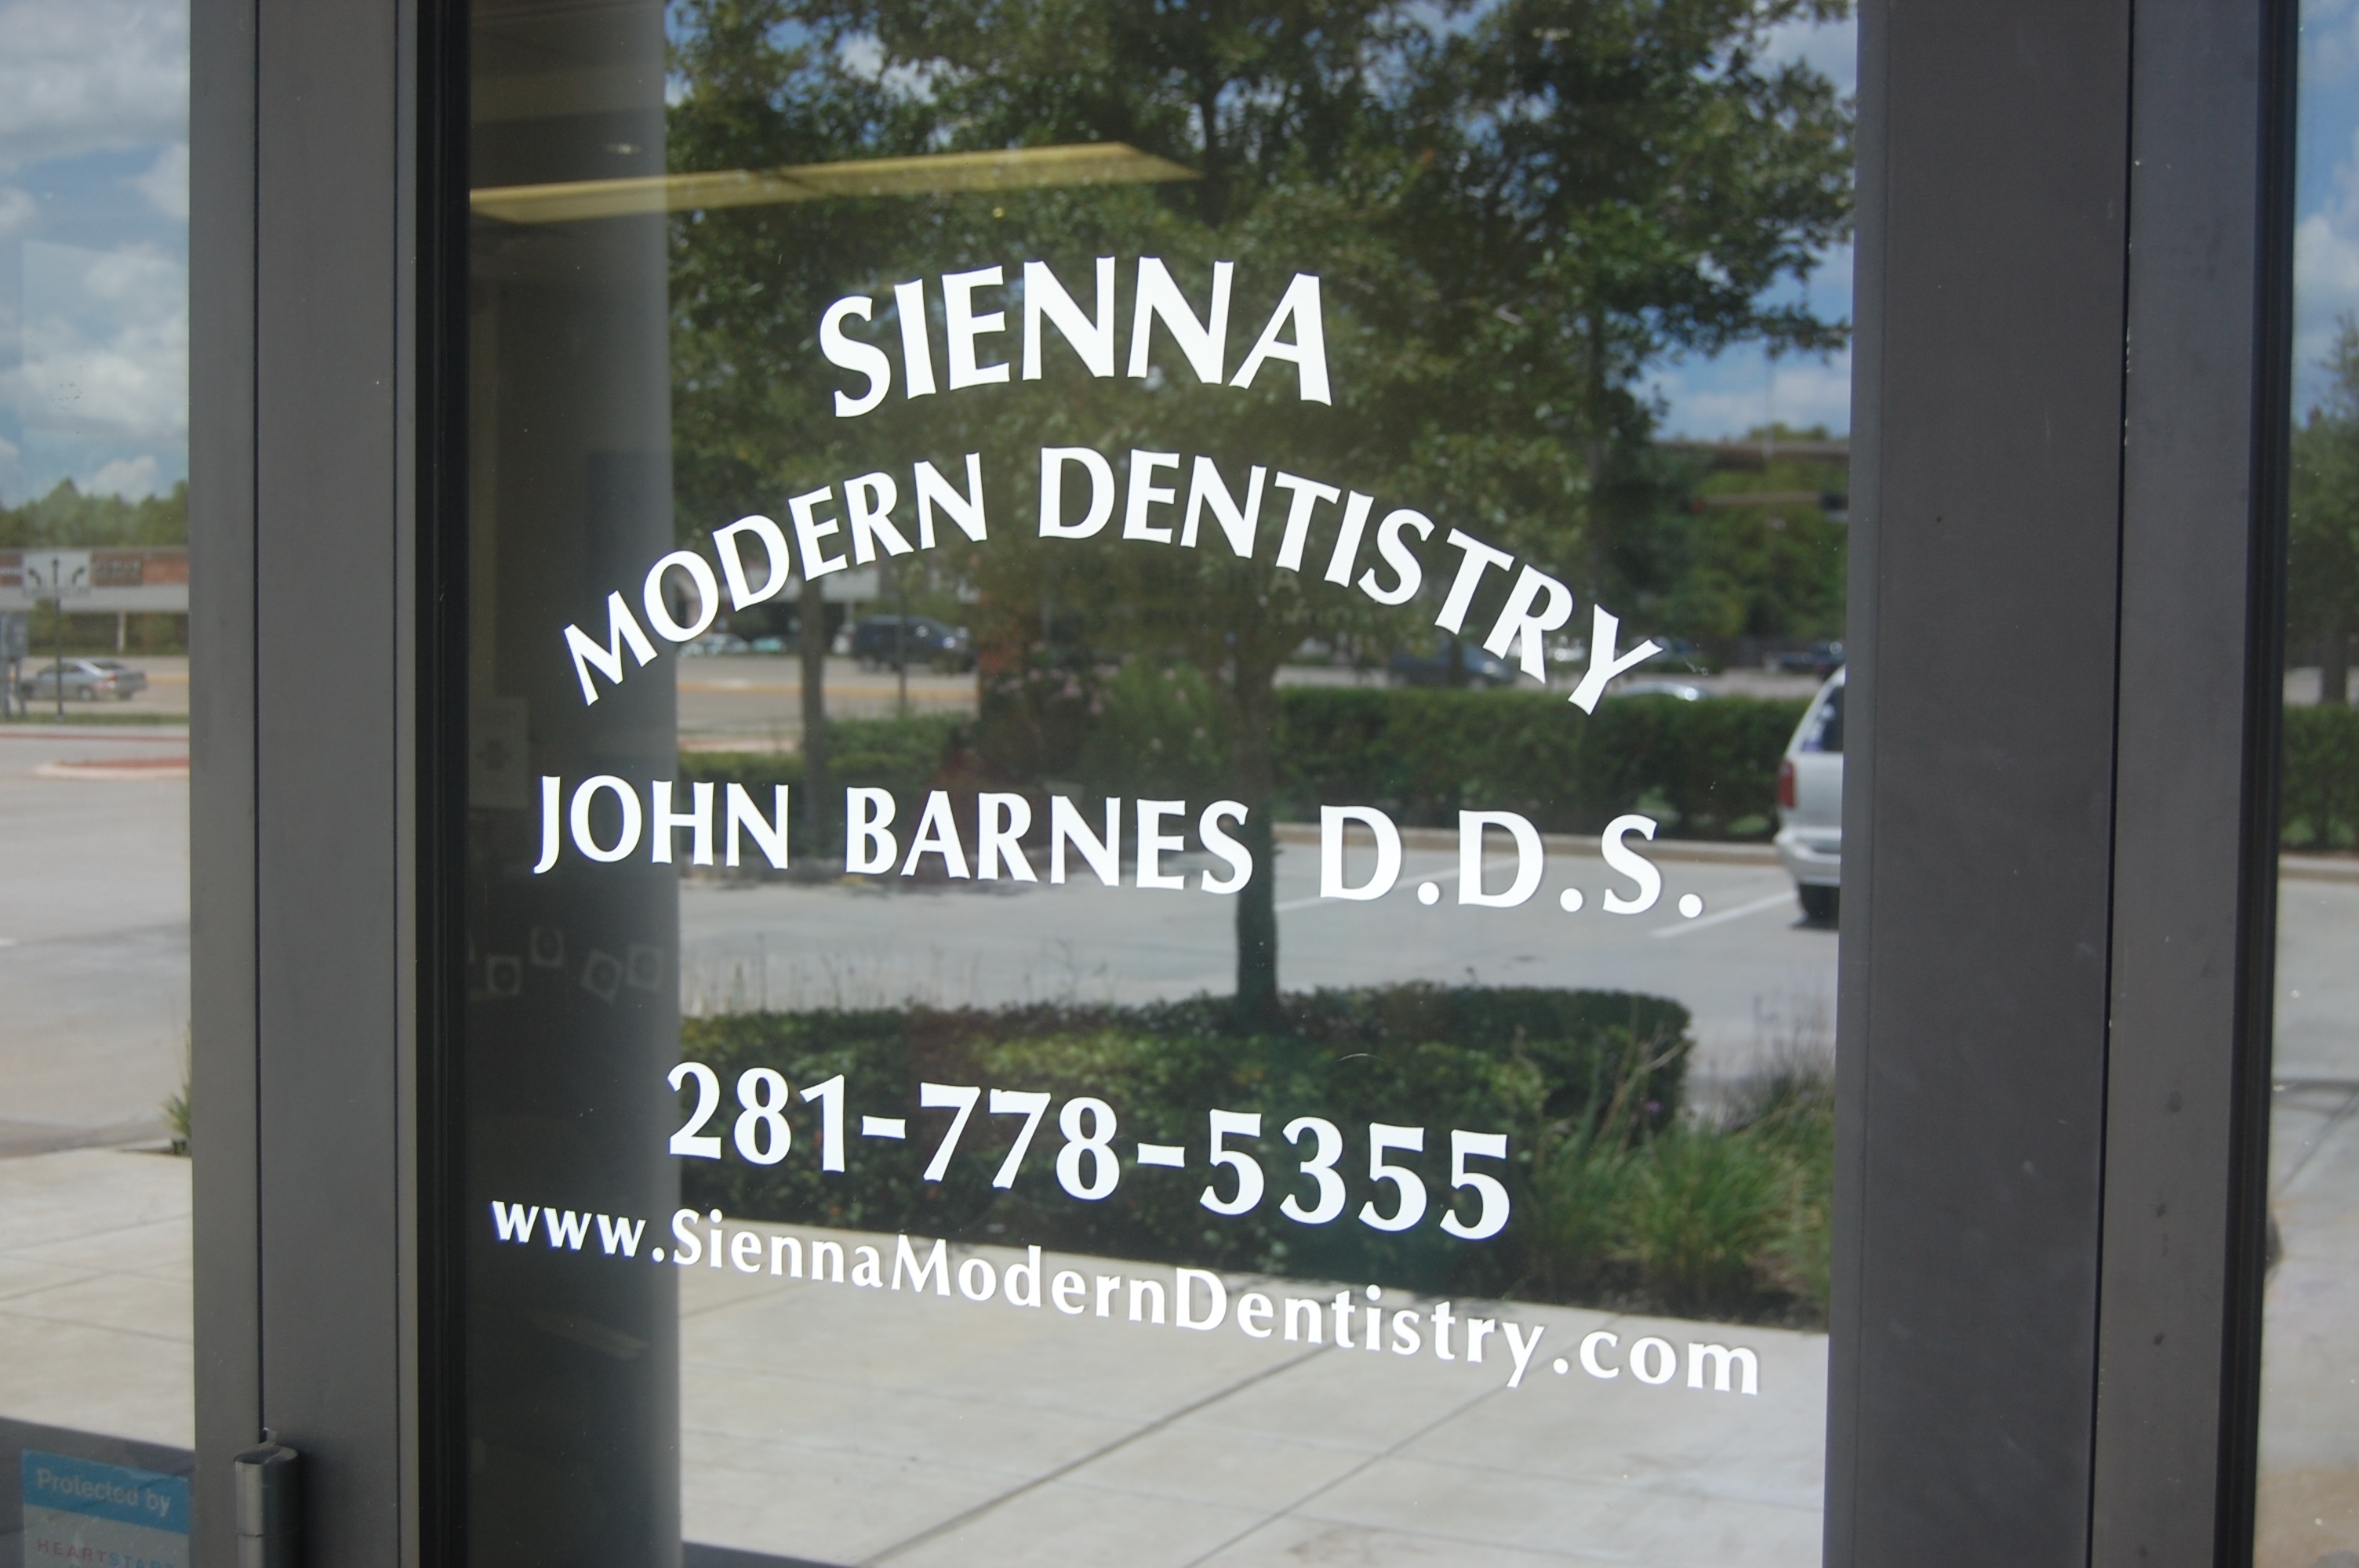 Sienna Modern Dentistry and Orthodontics opened its doors to the Missouri City community in June 2011.